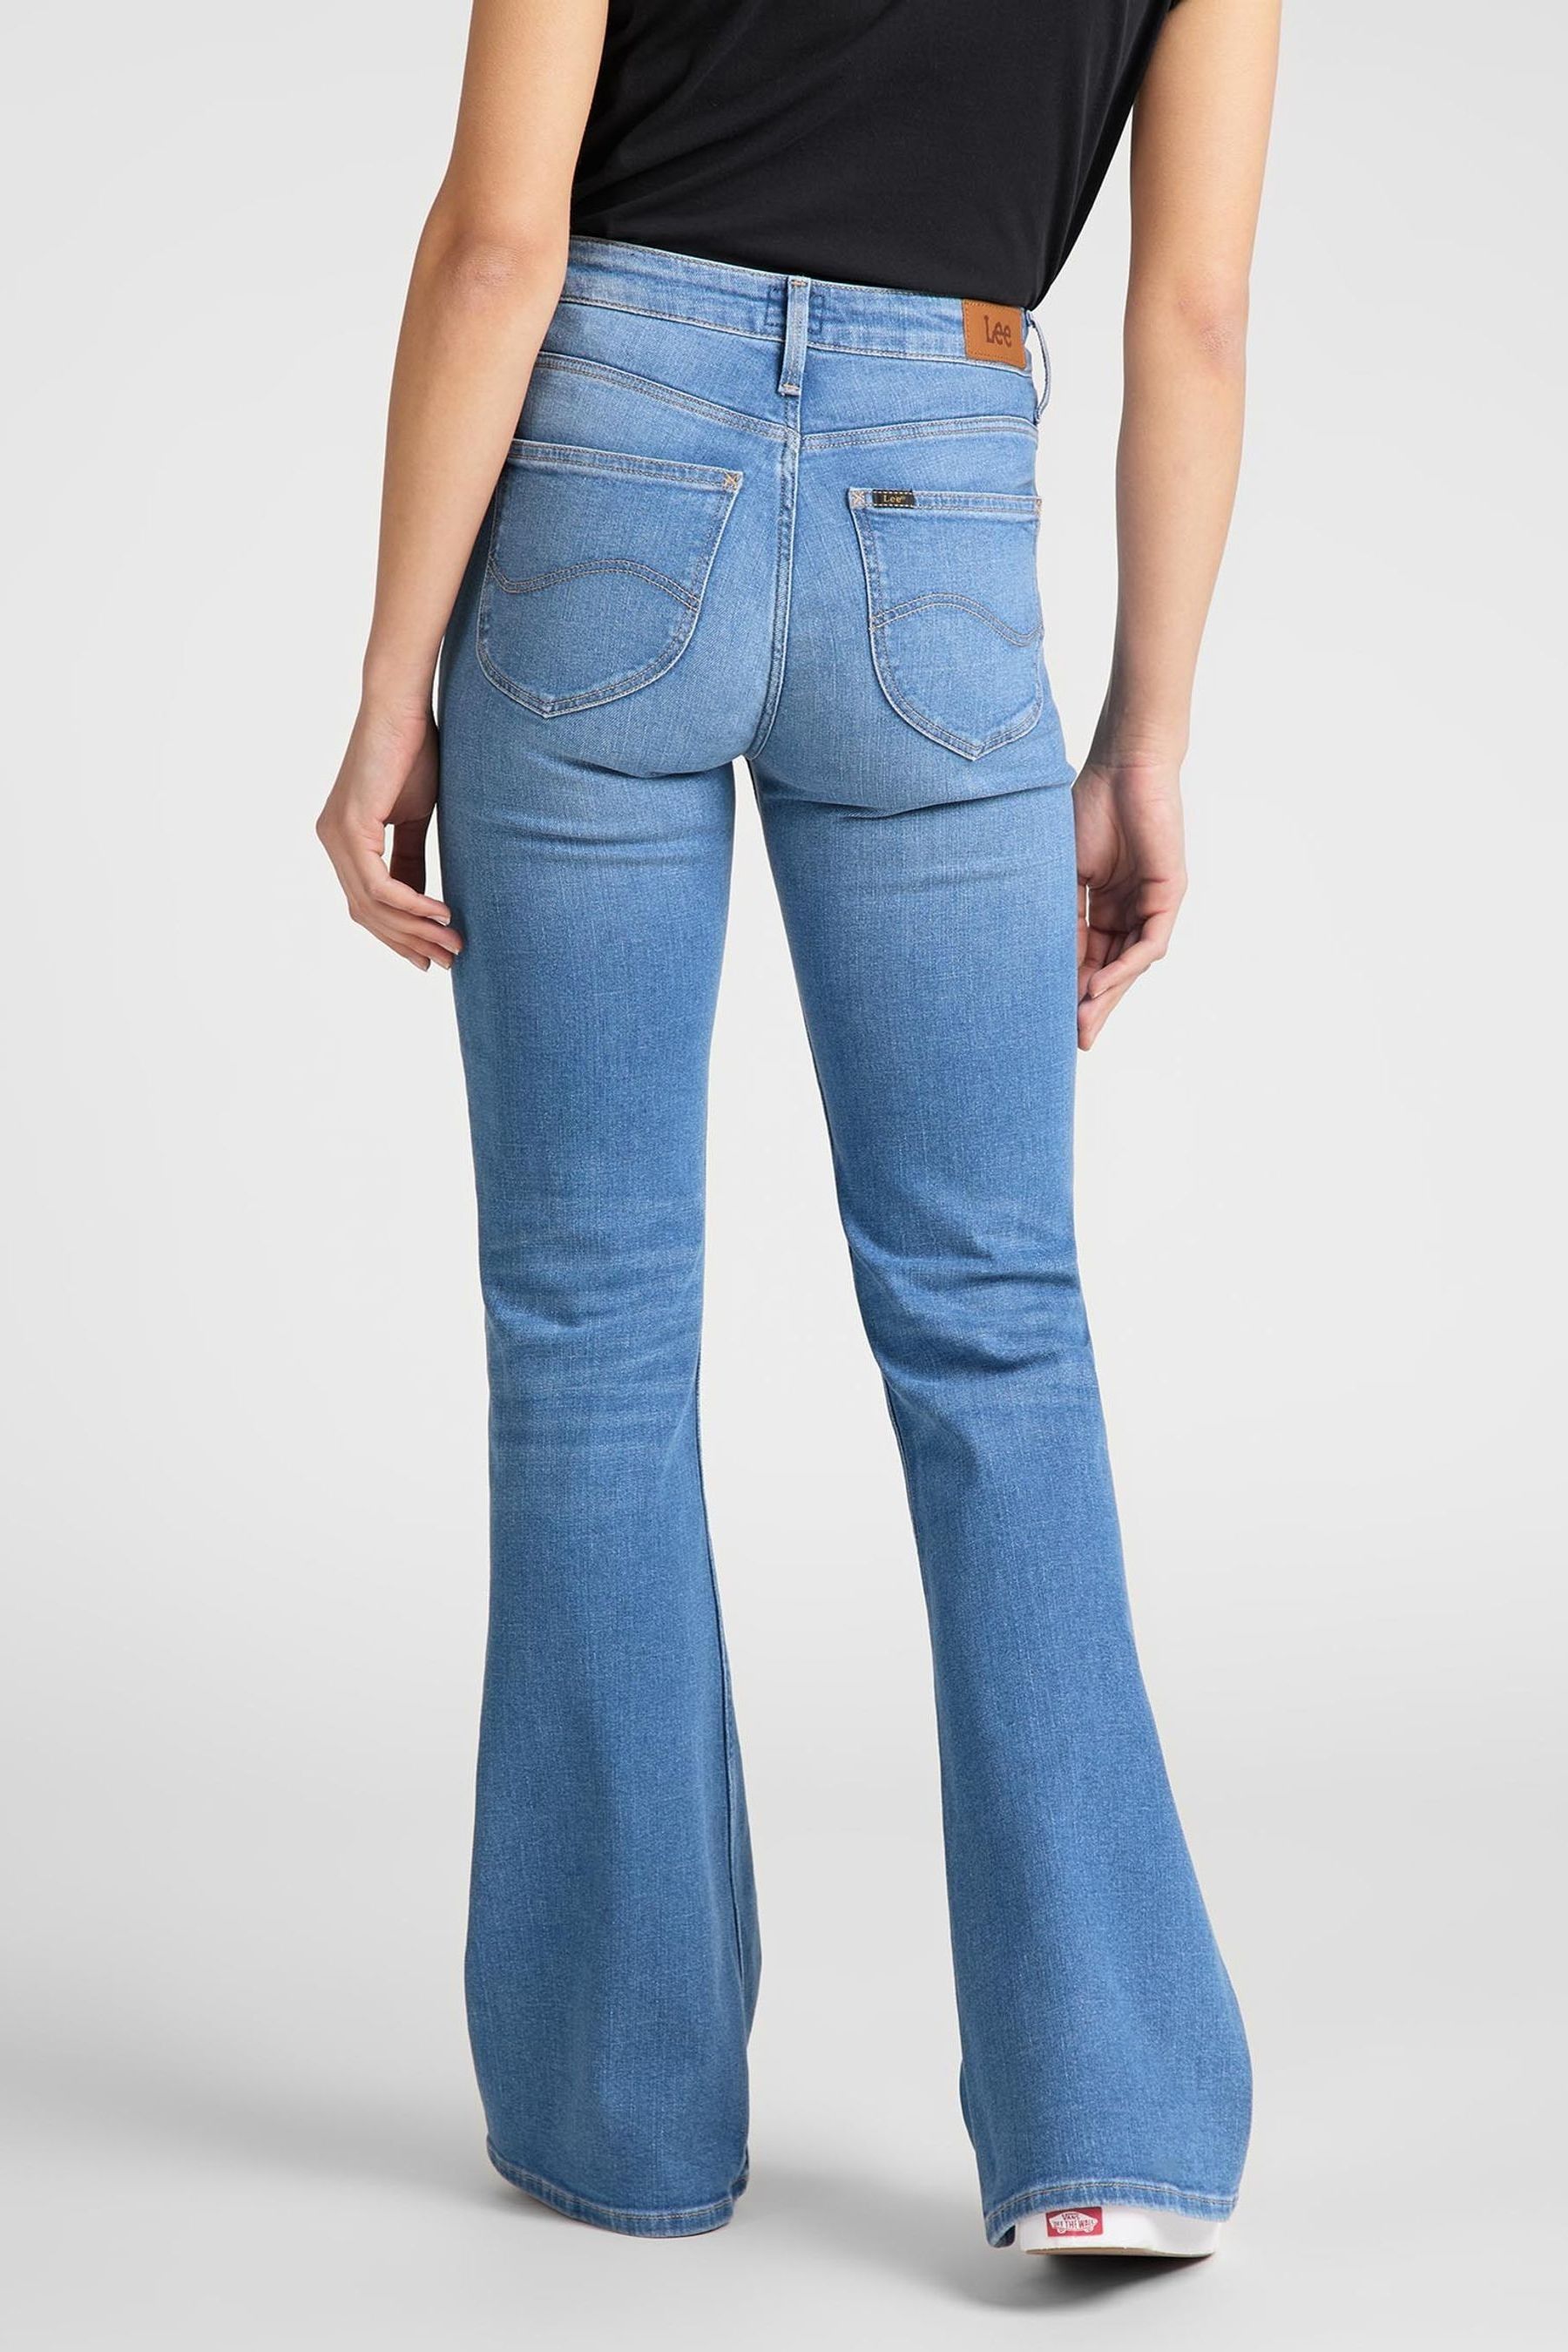 Buy Lee® Breese High Waist Flare Jeans from the Next UK online shop